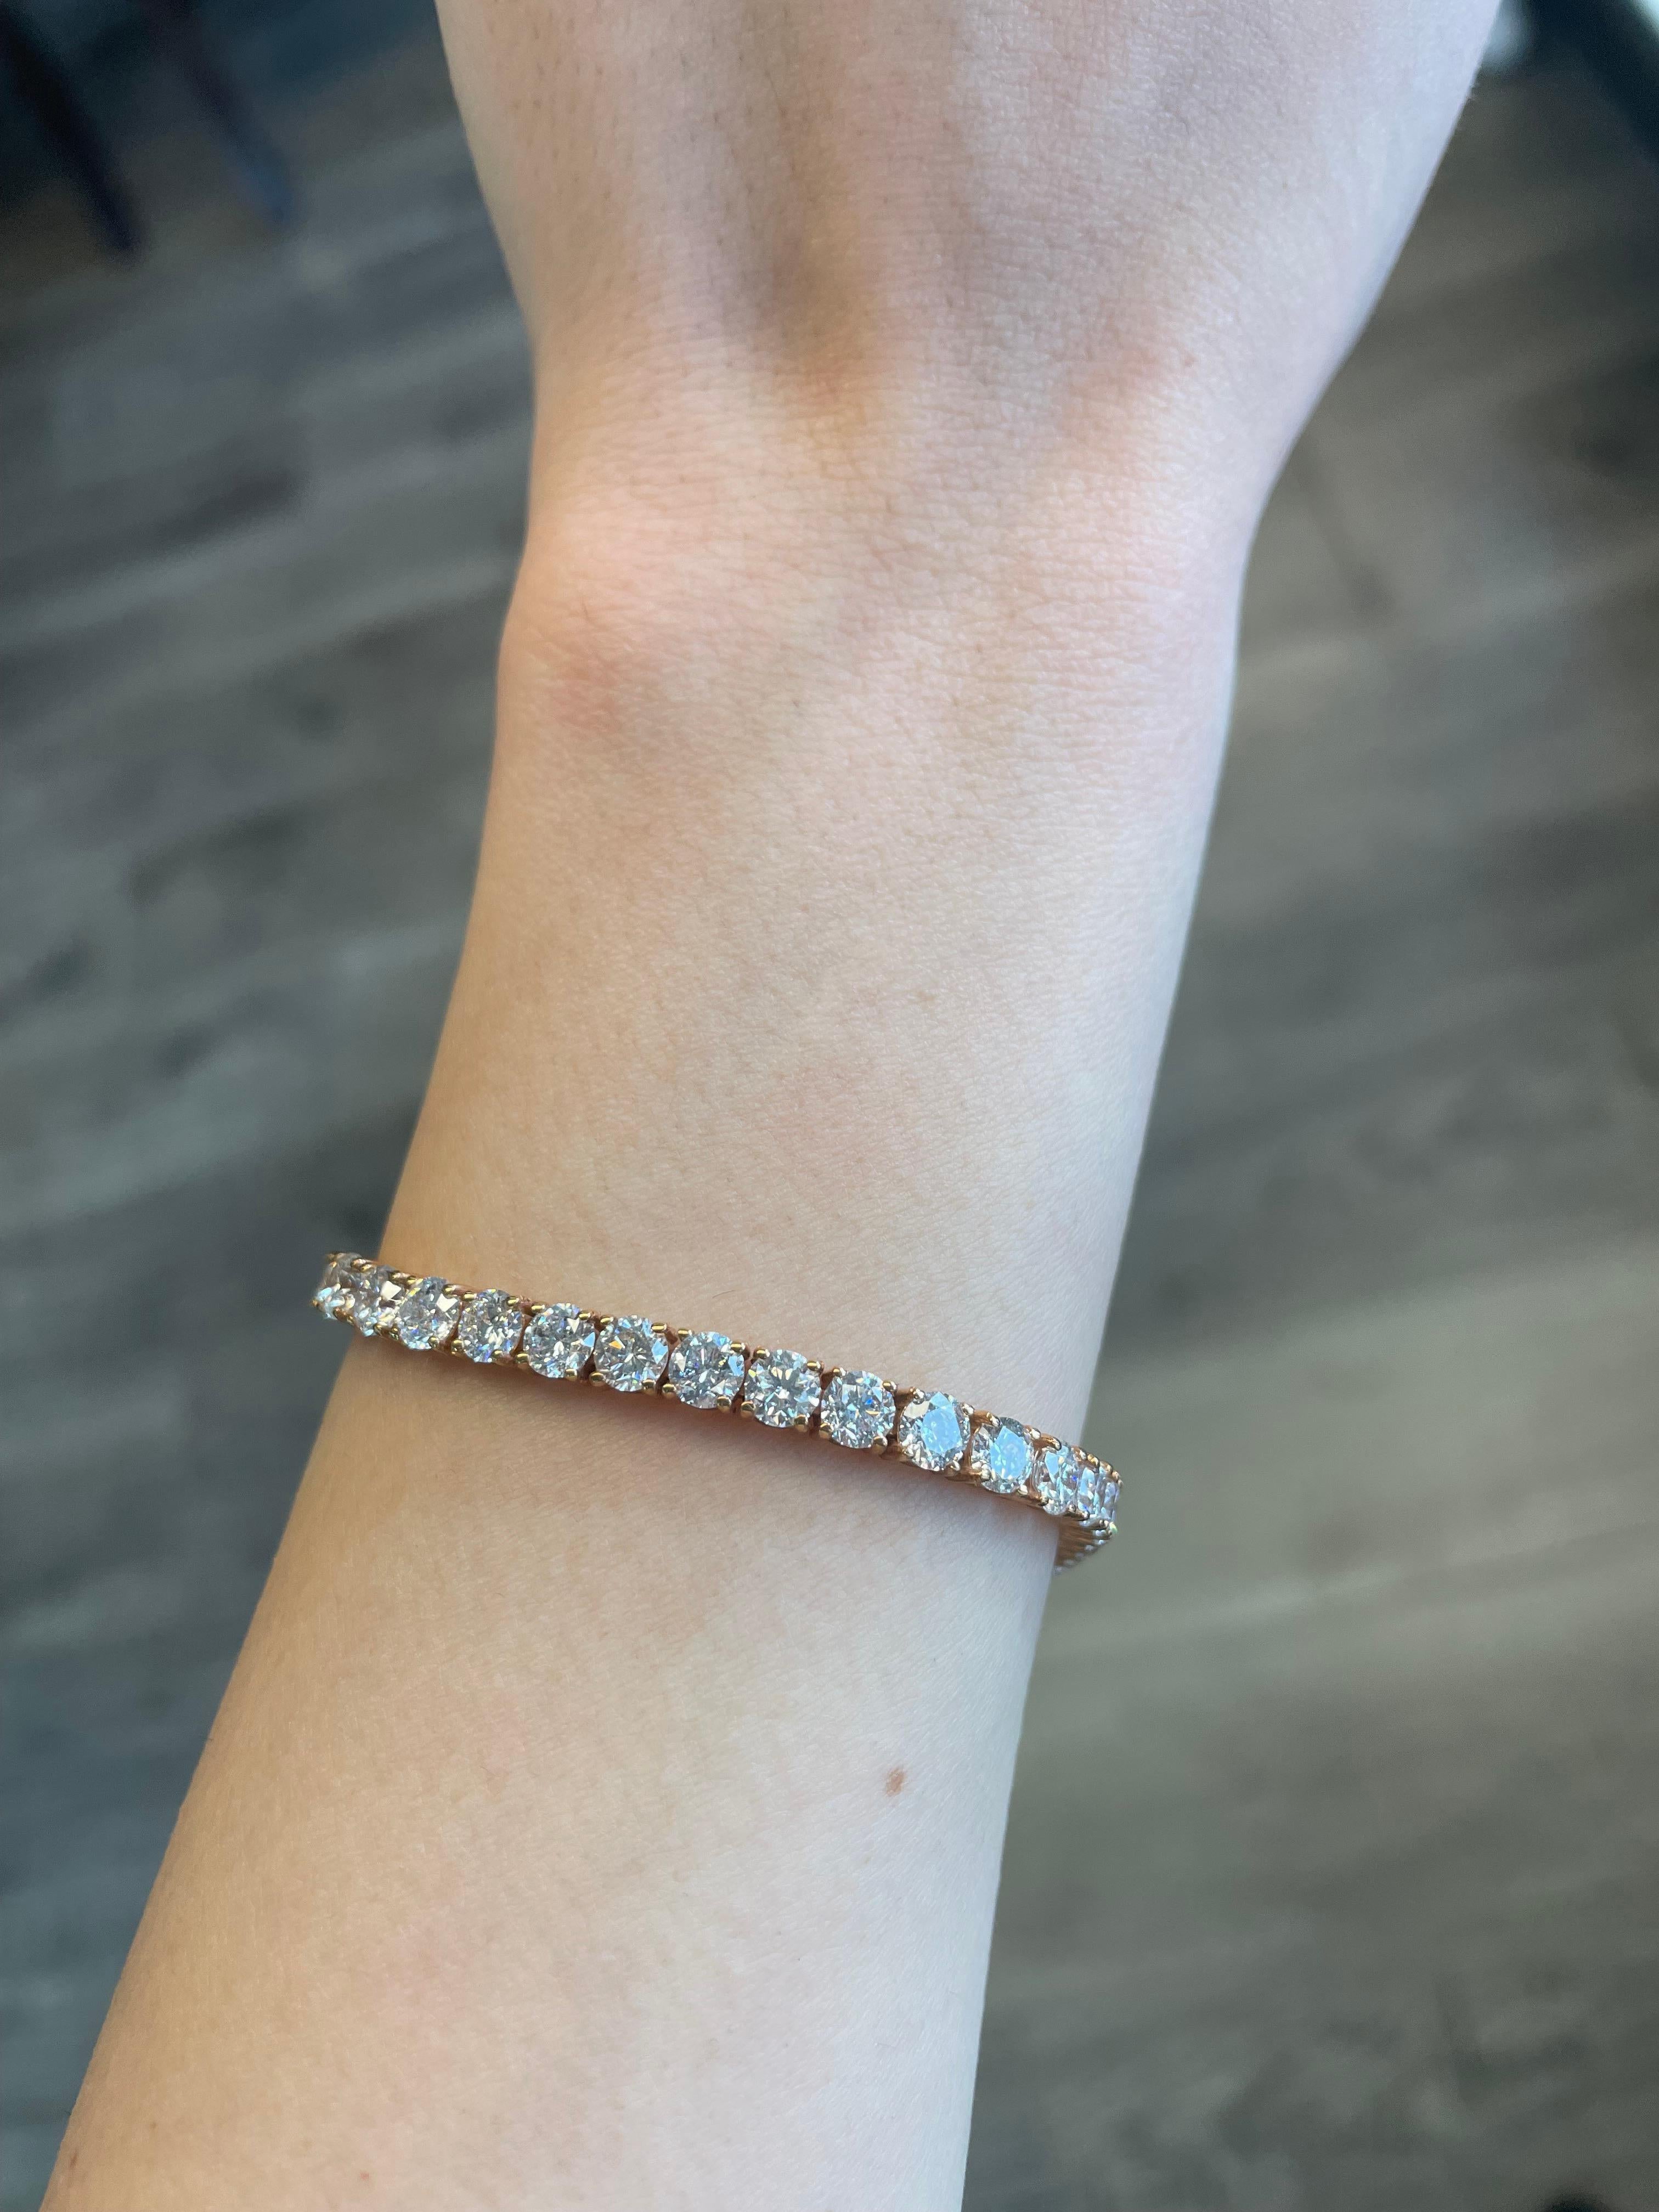 Exquisite and timeless diamonds tennis bracelet. High jewelry by Alexander Beverly Hills.
44 round brilliant diamonds, 13.04 carats total. Approximately G/H color and SI1-SI3 clarity. Four prong set in 14k rose gold.
Accommodated with an up-to-date